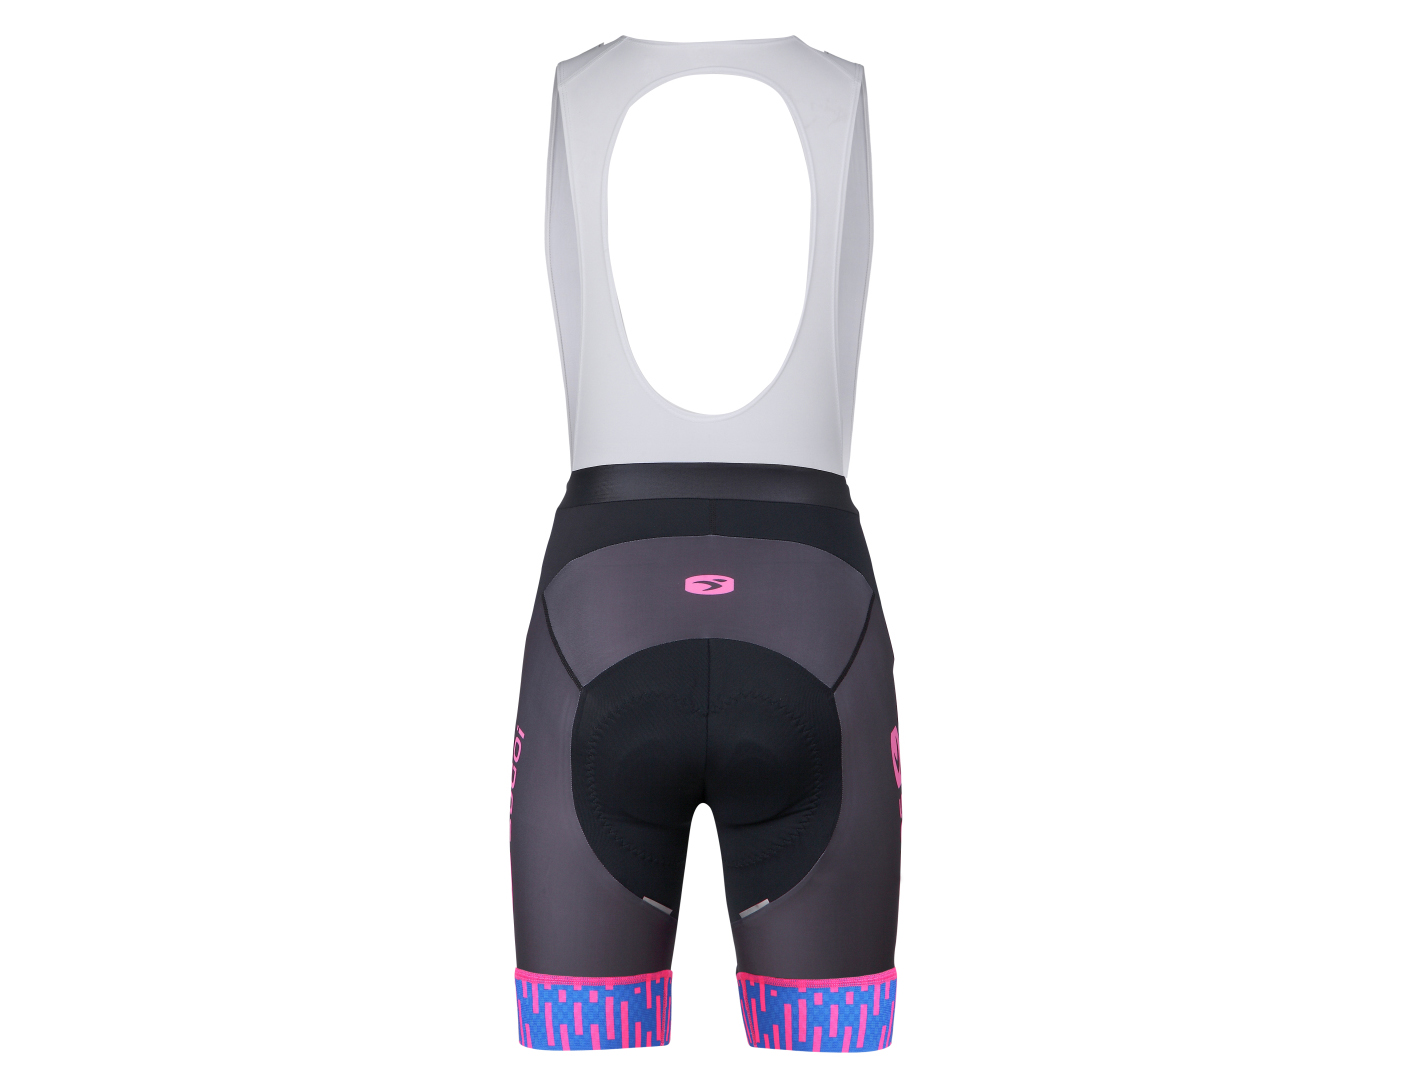  Lady’s knitted bicycle Bib short with pad